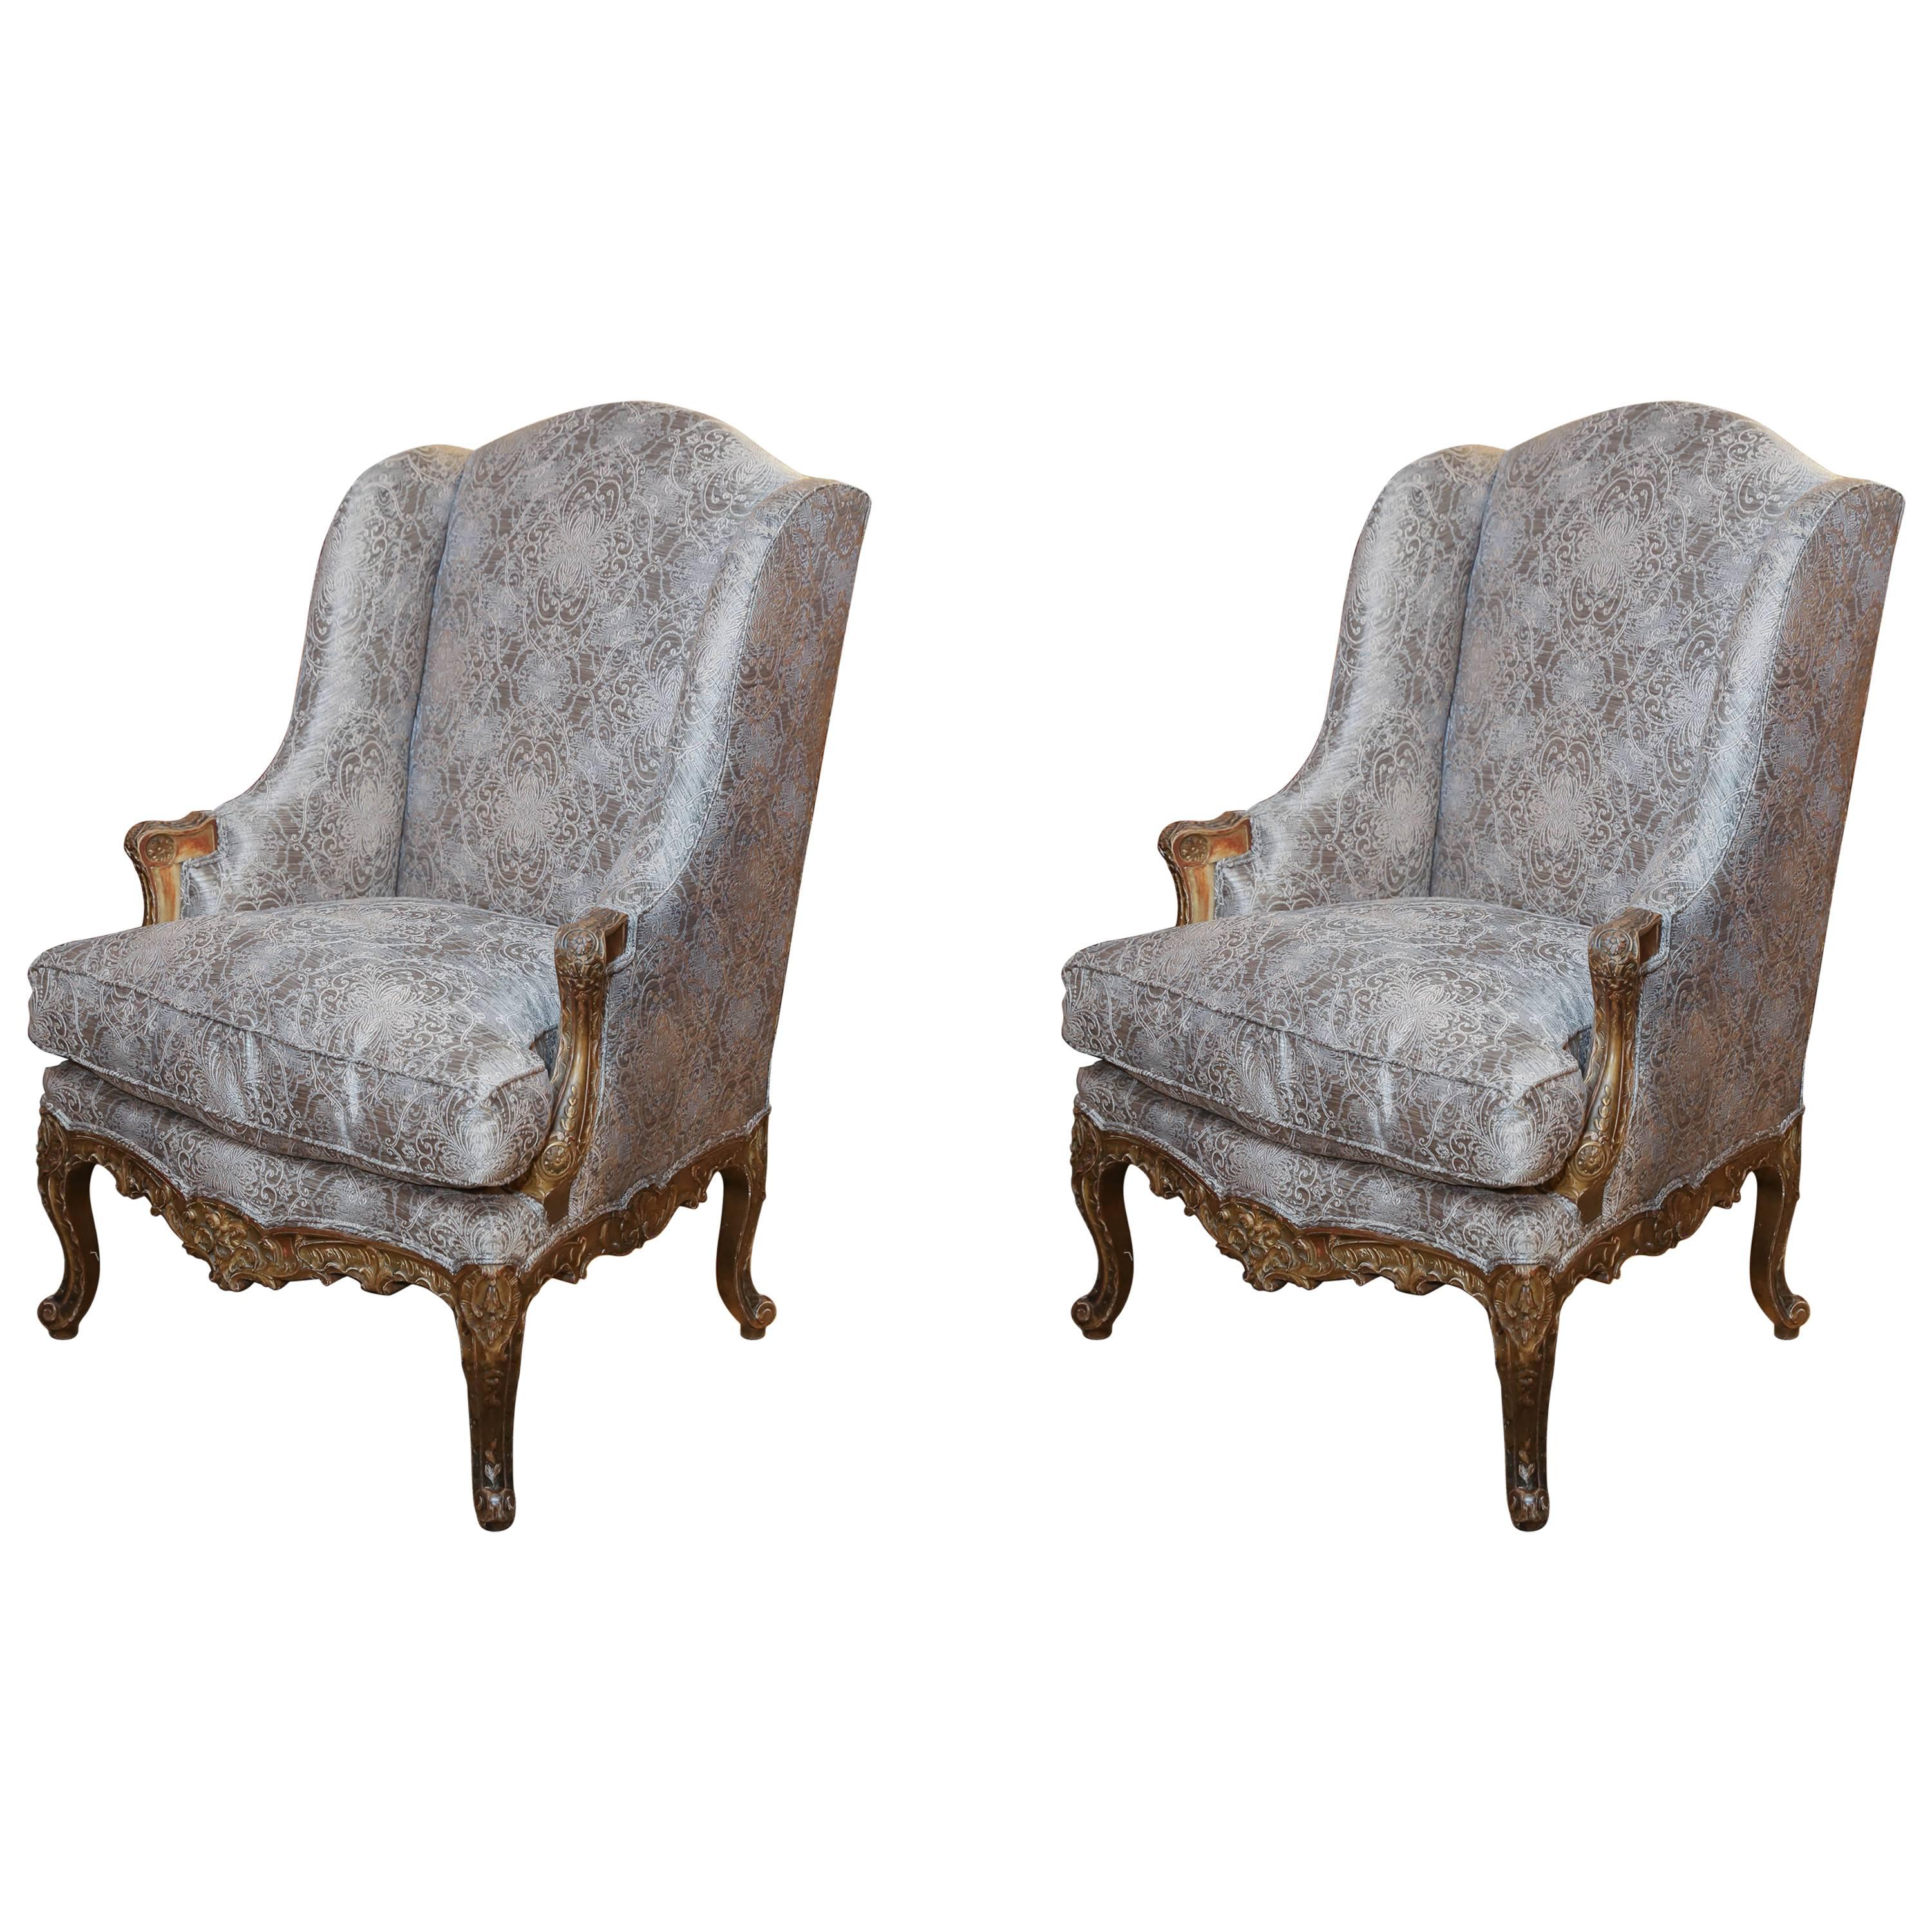 Pair of Tall Bergere French Chairs with Gilt and Carved Wood, Louis XV Style